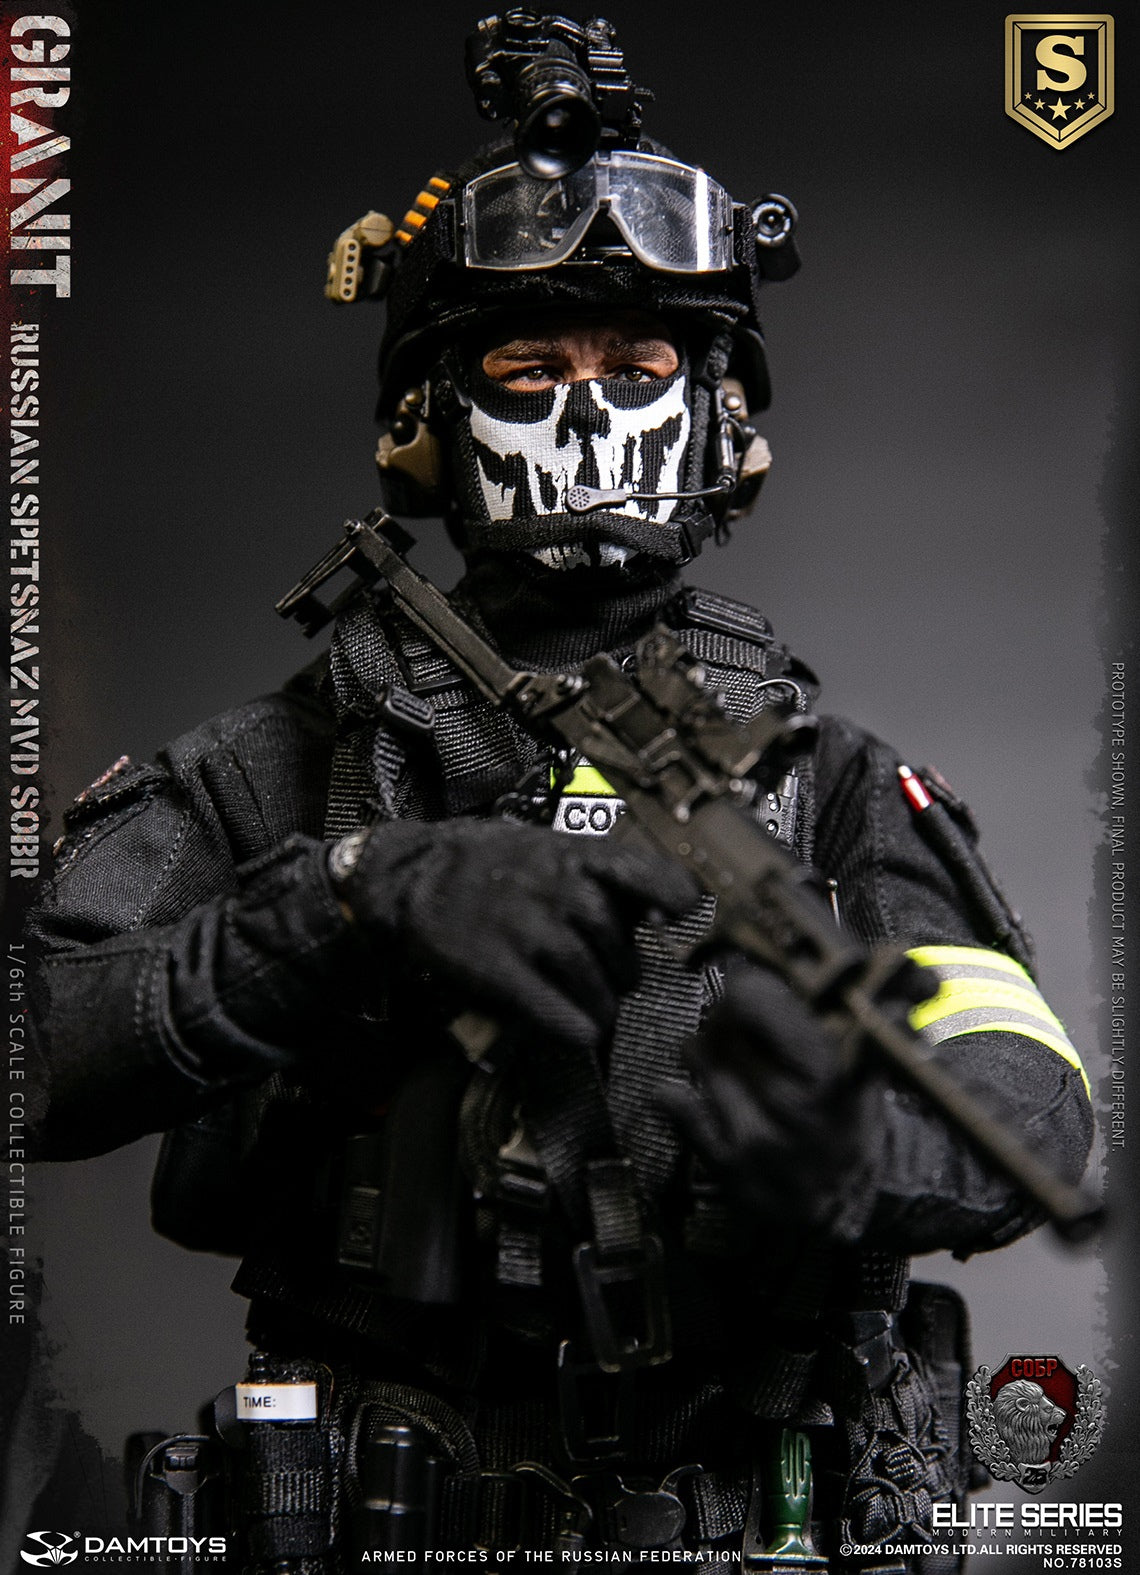 Damtoys - 78103S - Elite Series - Armed Forces of the Russian Federation: SPETSNAZ MVD SOBR Granit (Special ed.) (1/6 Scale) - Marvelous Toys